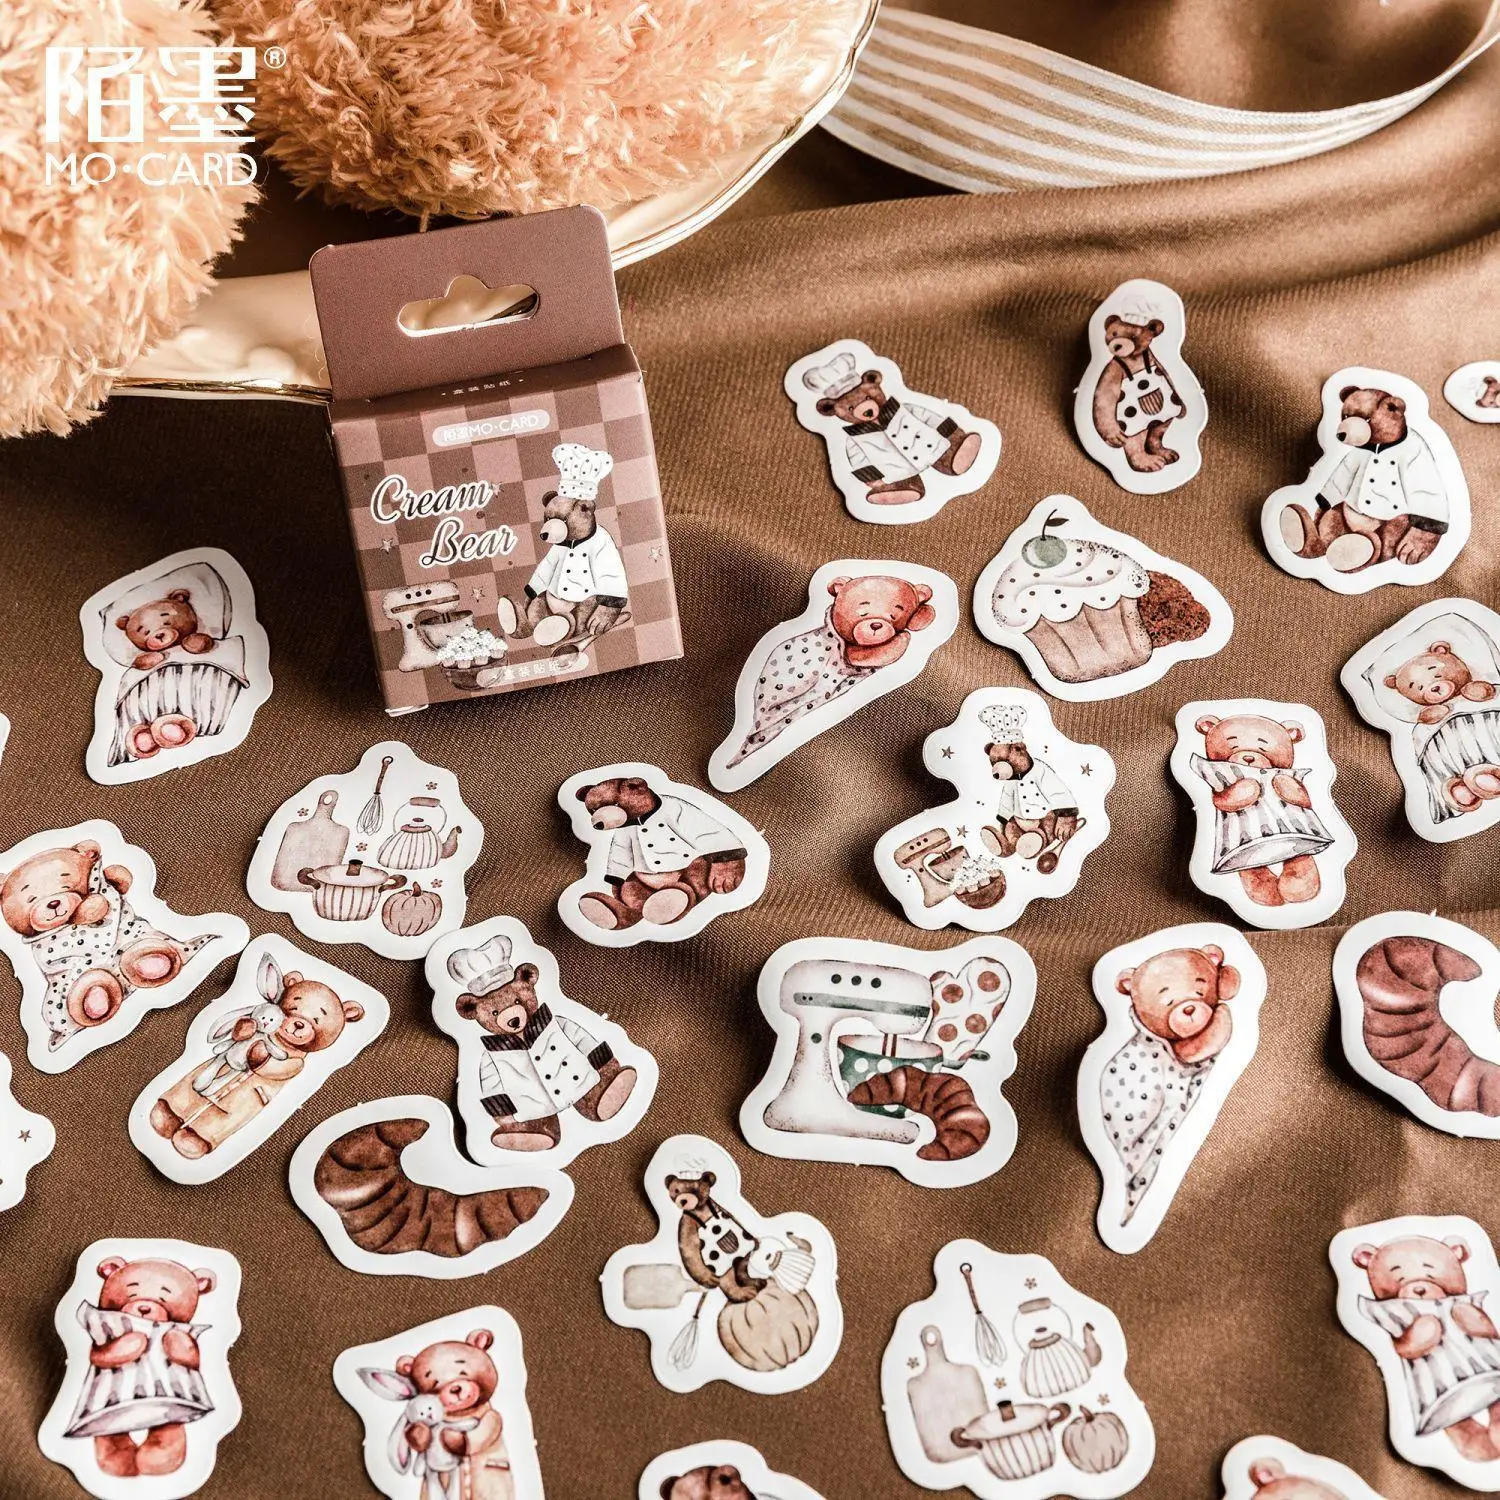 

45Pcs Cute Cartoon Bear Boxed Stickers Decorative Scrapbooking Label Diary Stationery Album Phone Journal Planner